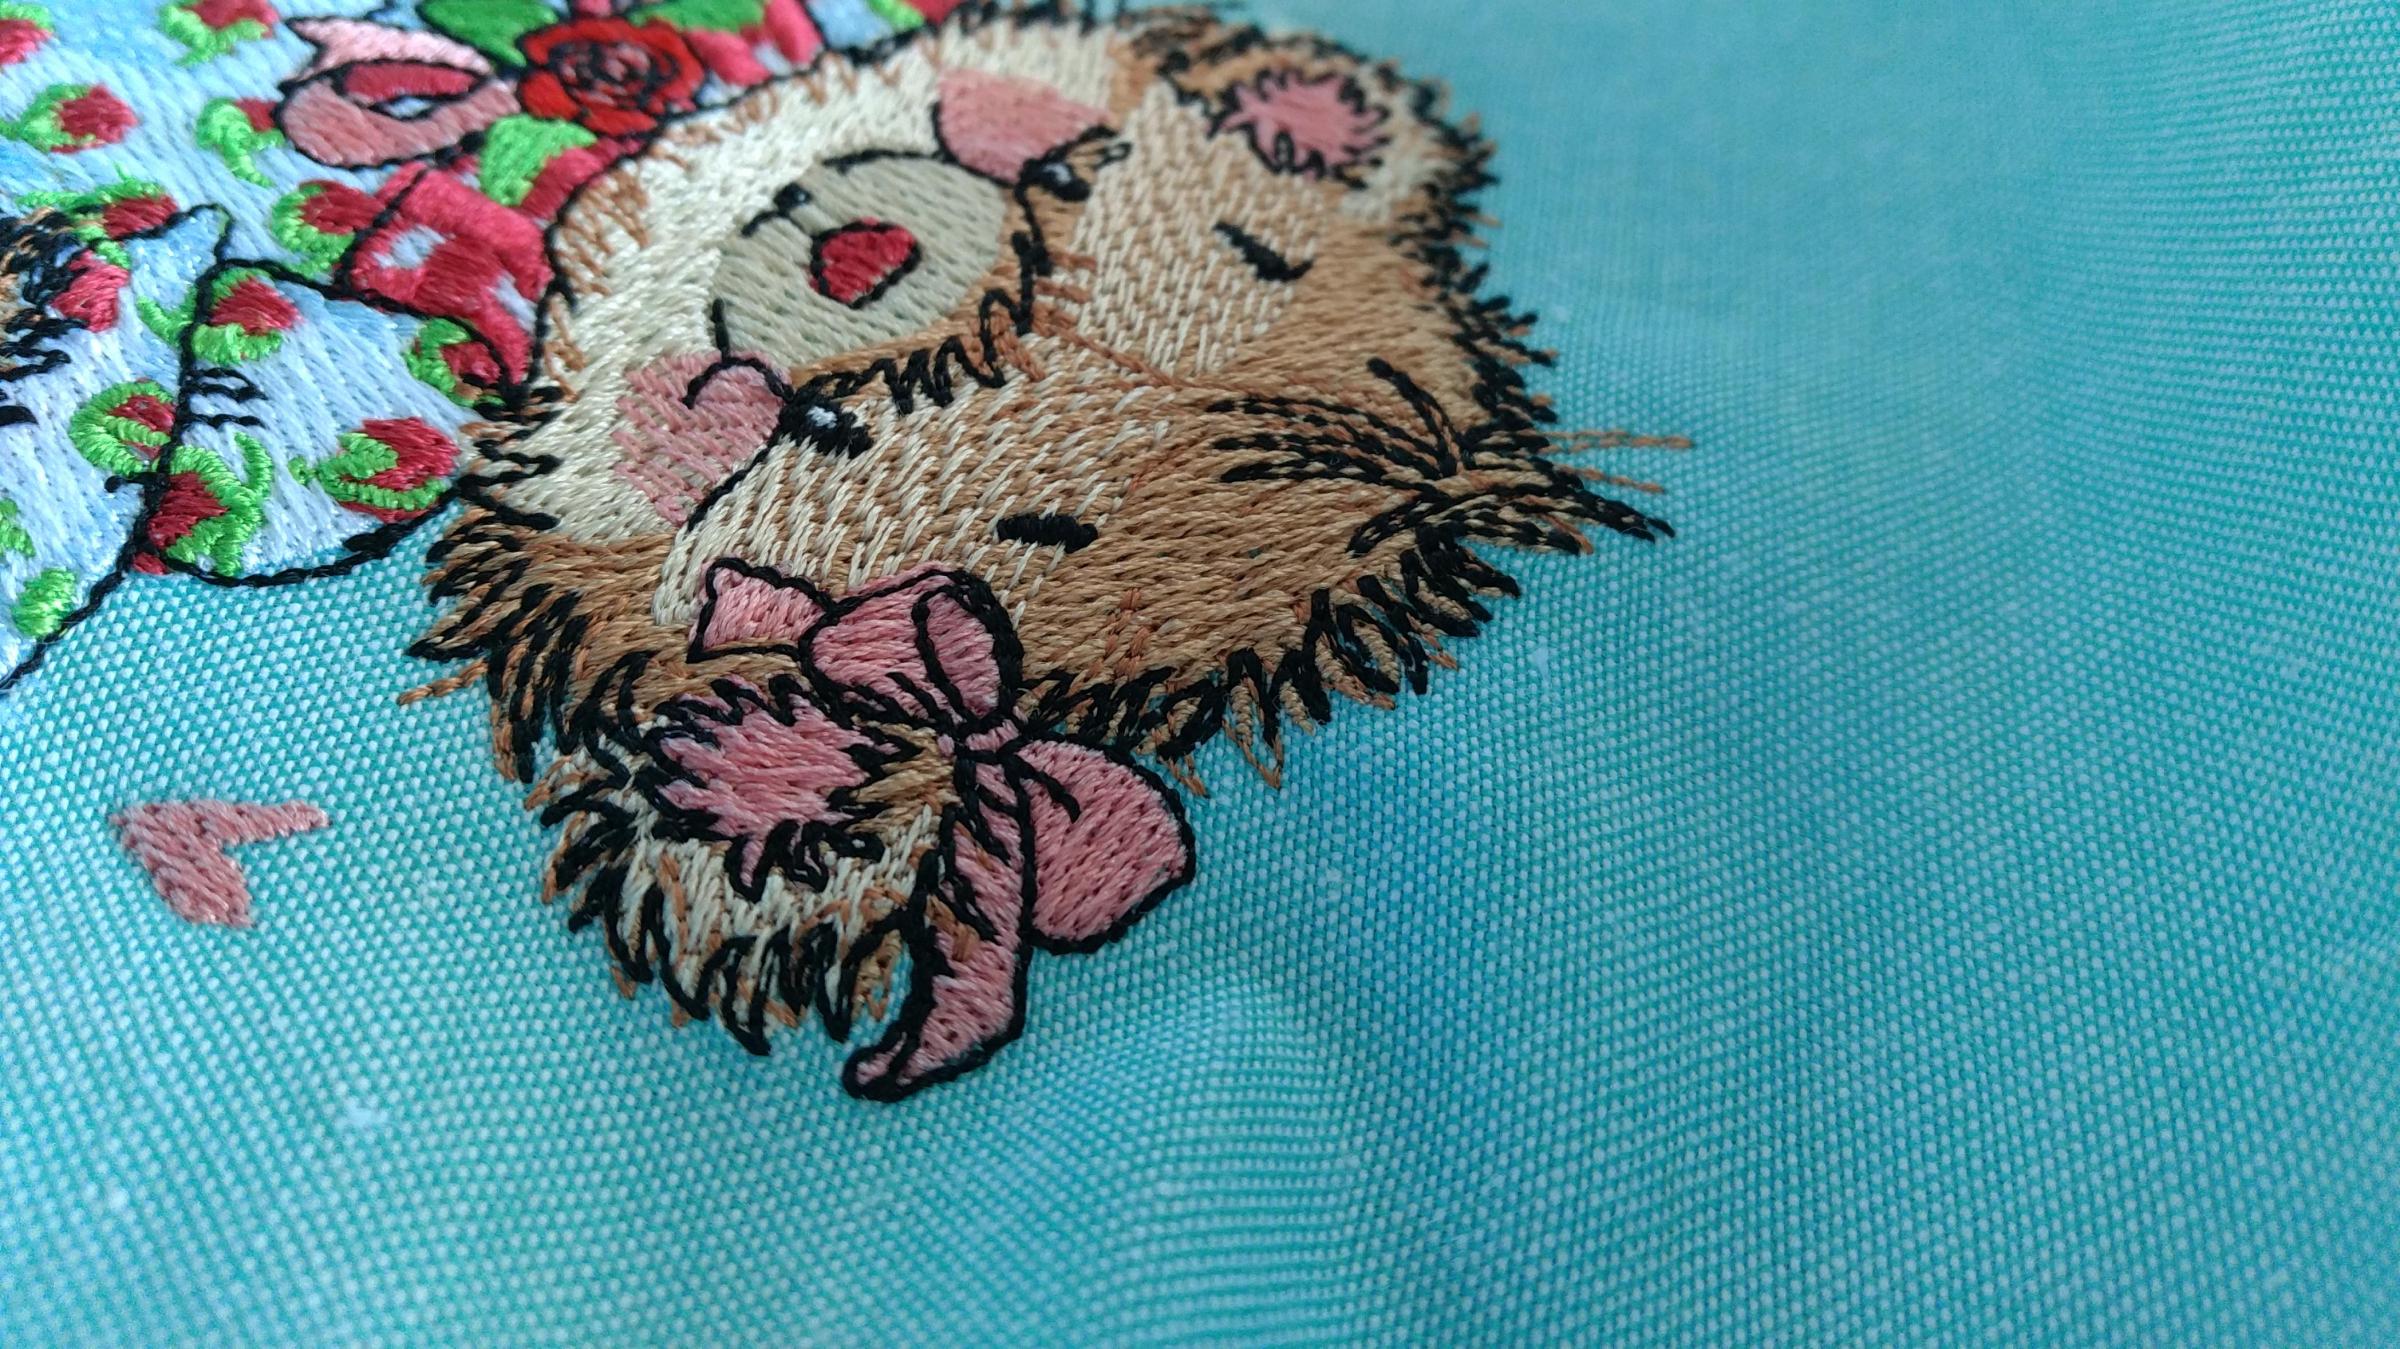 Part of Teddy bear girl embroidery